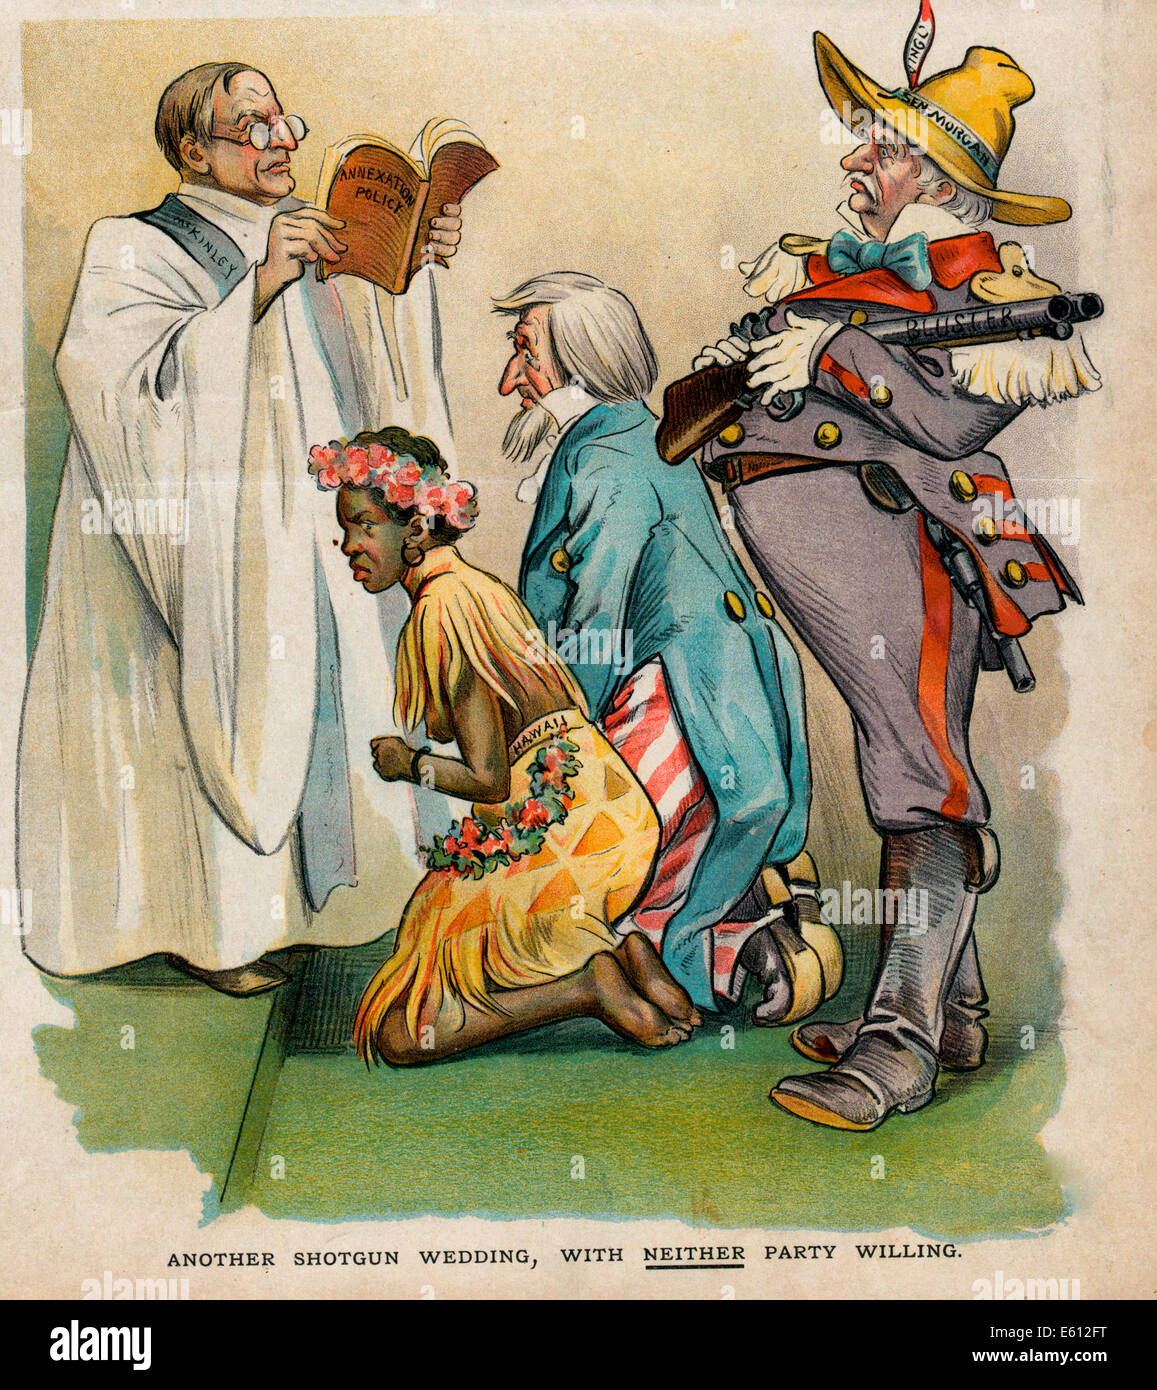 Another shotgun wedding, with neither party willing - wedding of Uncle Sam and a young woman labeled "Hawaii"; Political Cartoon Stock Photo